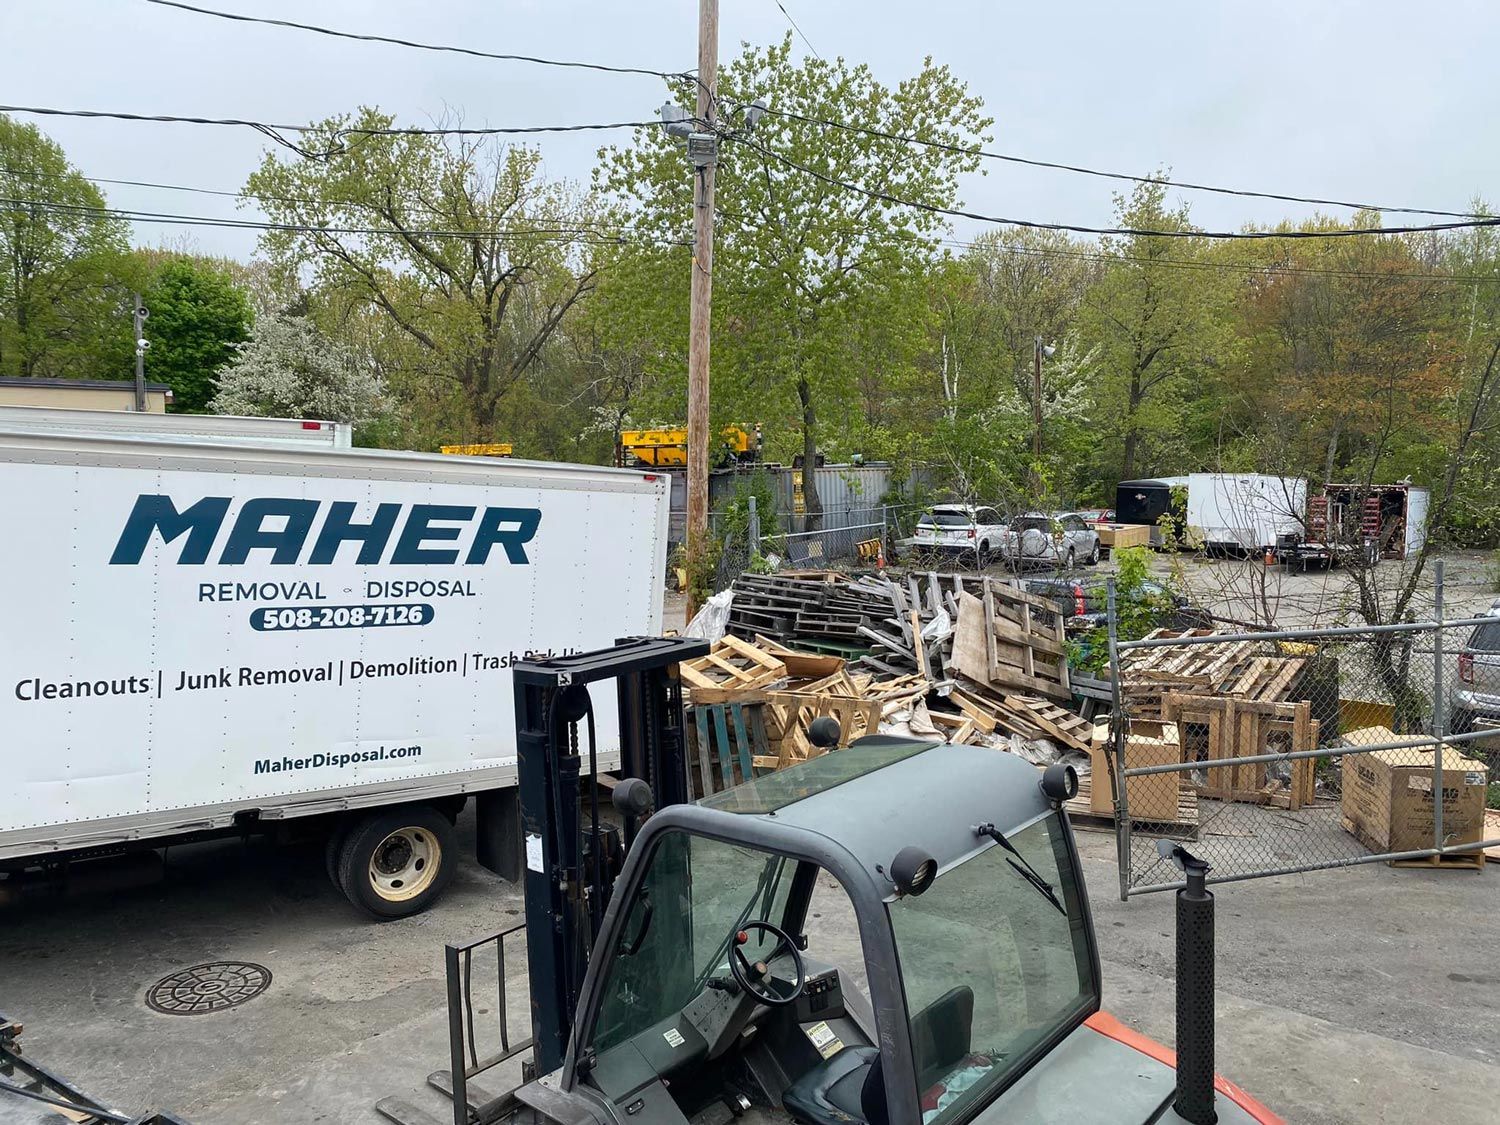 Maher Removal & Disposal is a waste management company in Massachusetts.